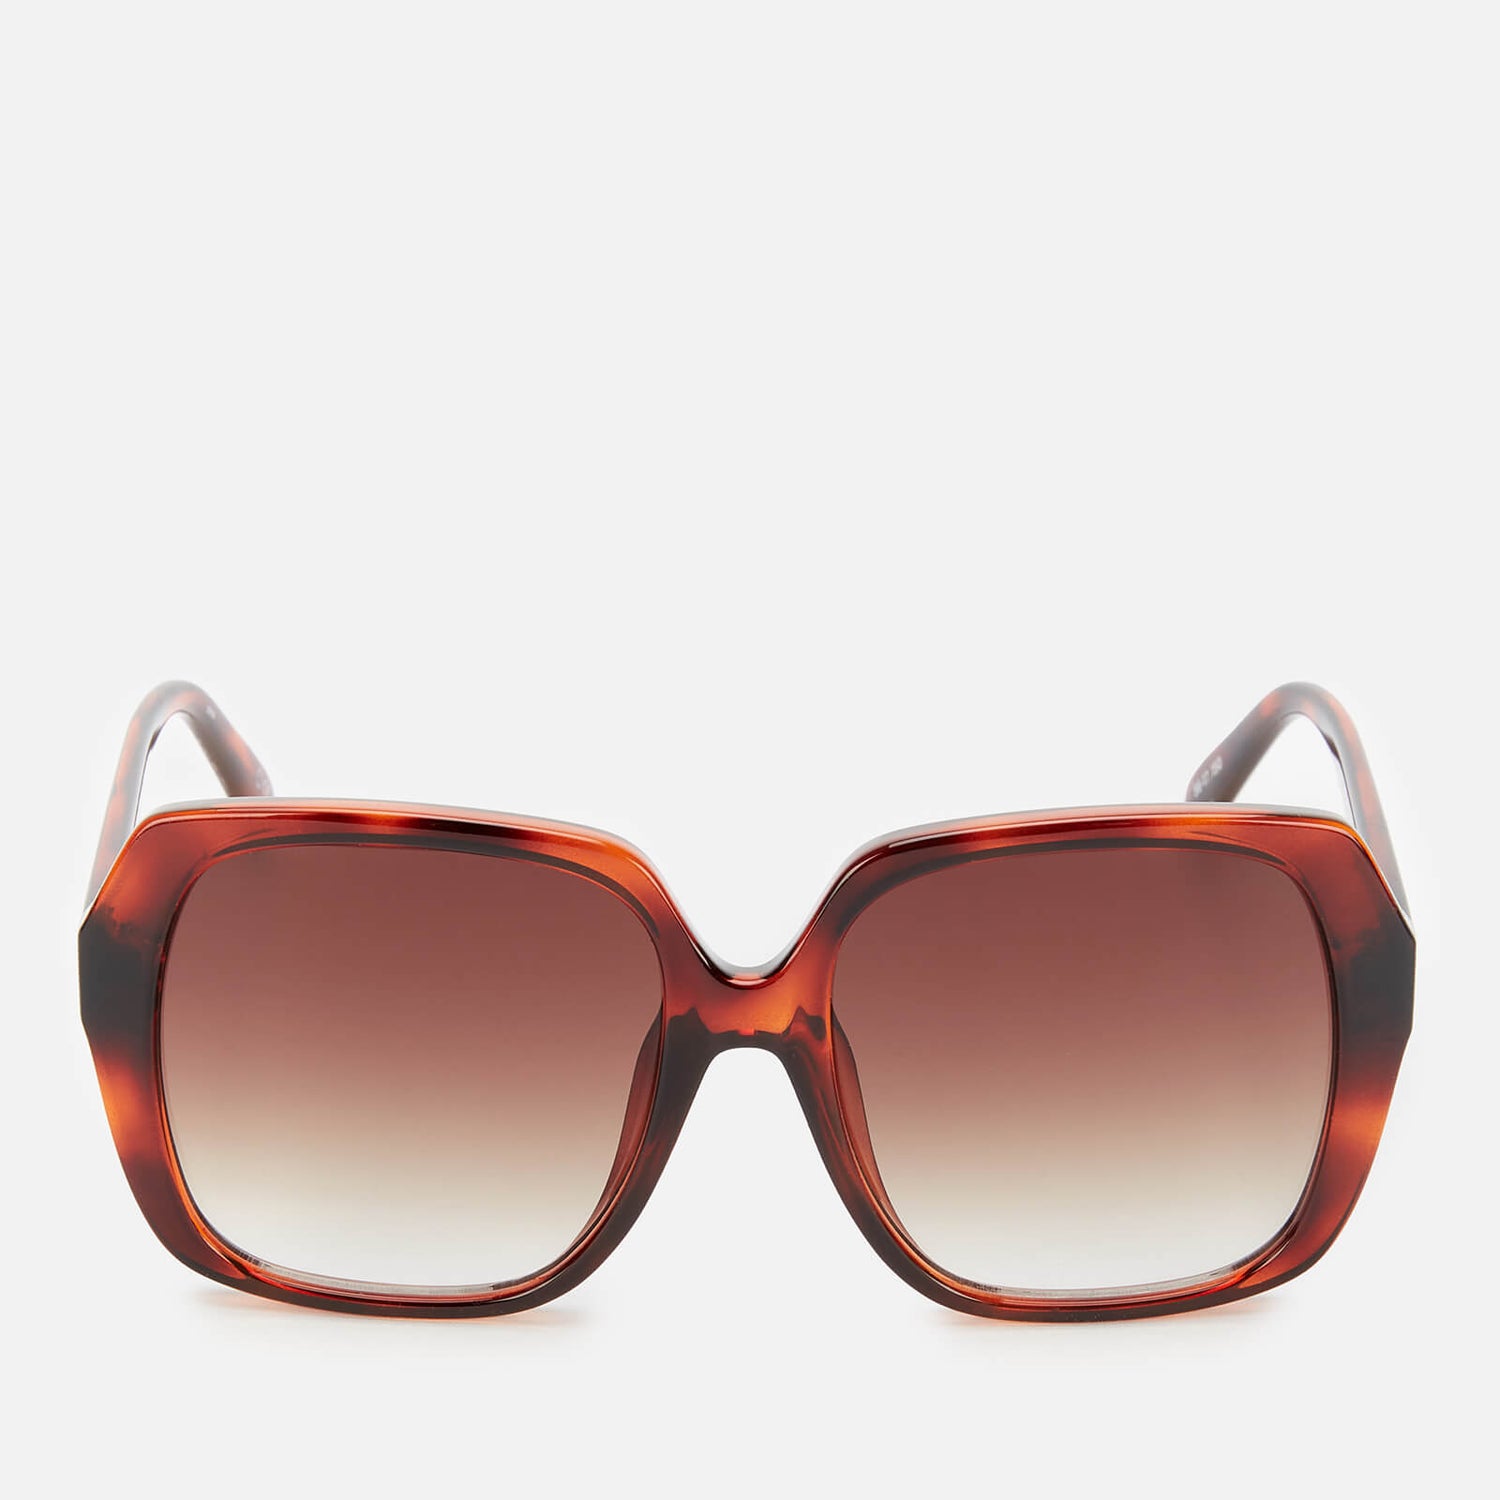 Le Specs Women's Frofro Oversized Sunglasses - Toffee Tort